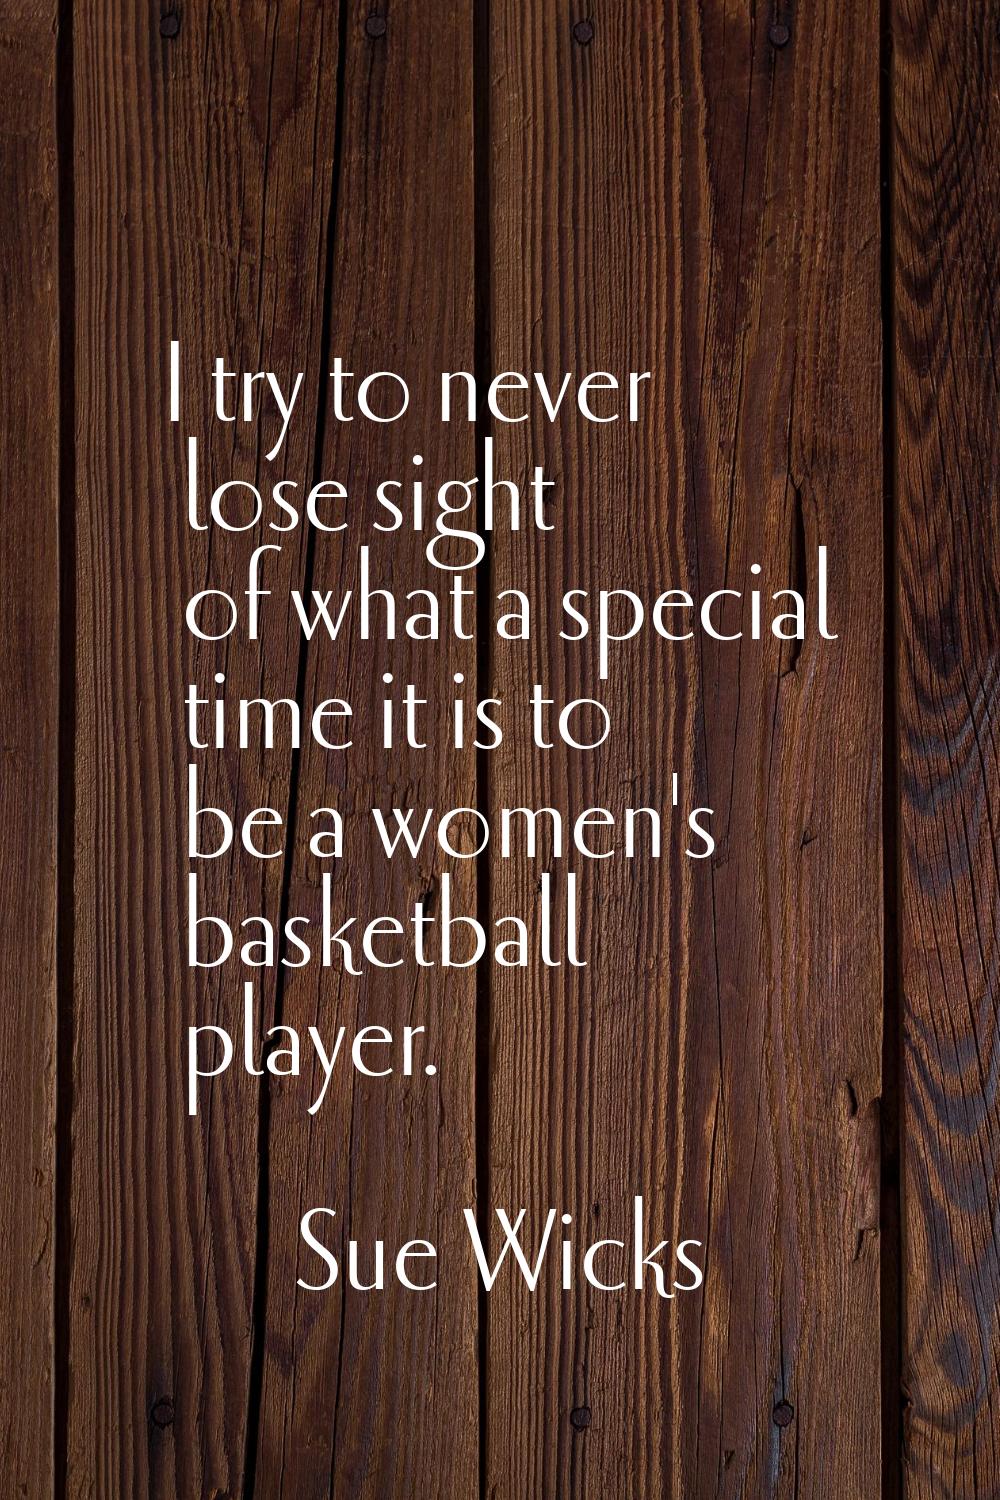 I try to never lose sight of what a special time it is to be a women's basketball player.